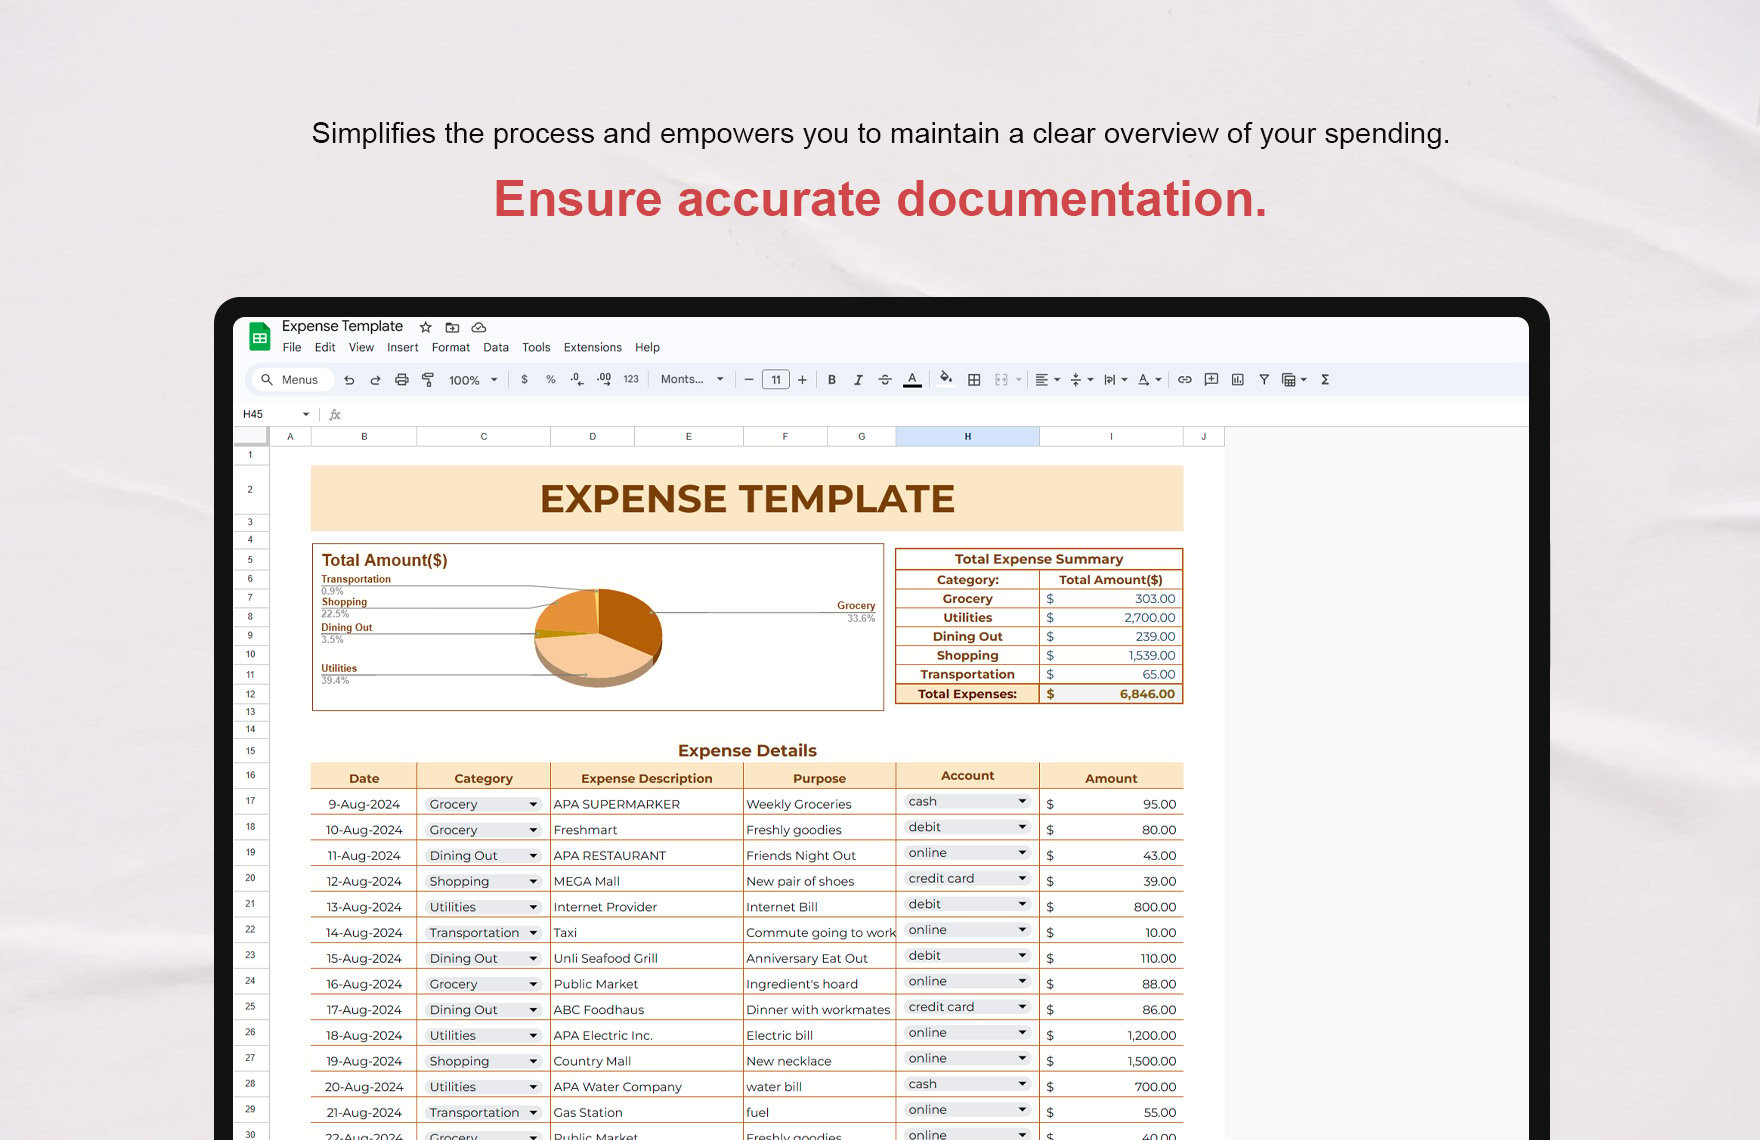 Expense Template